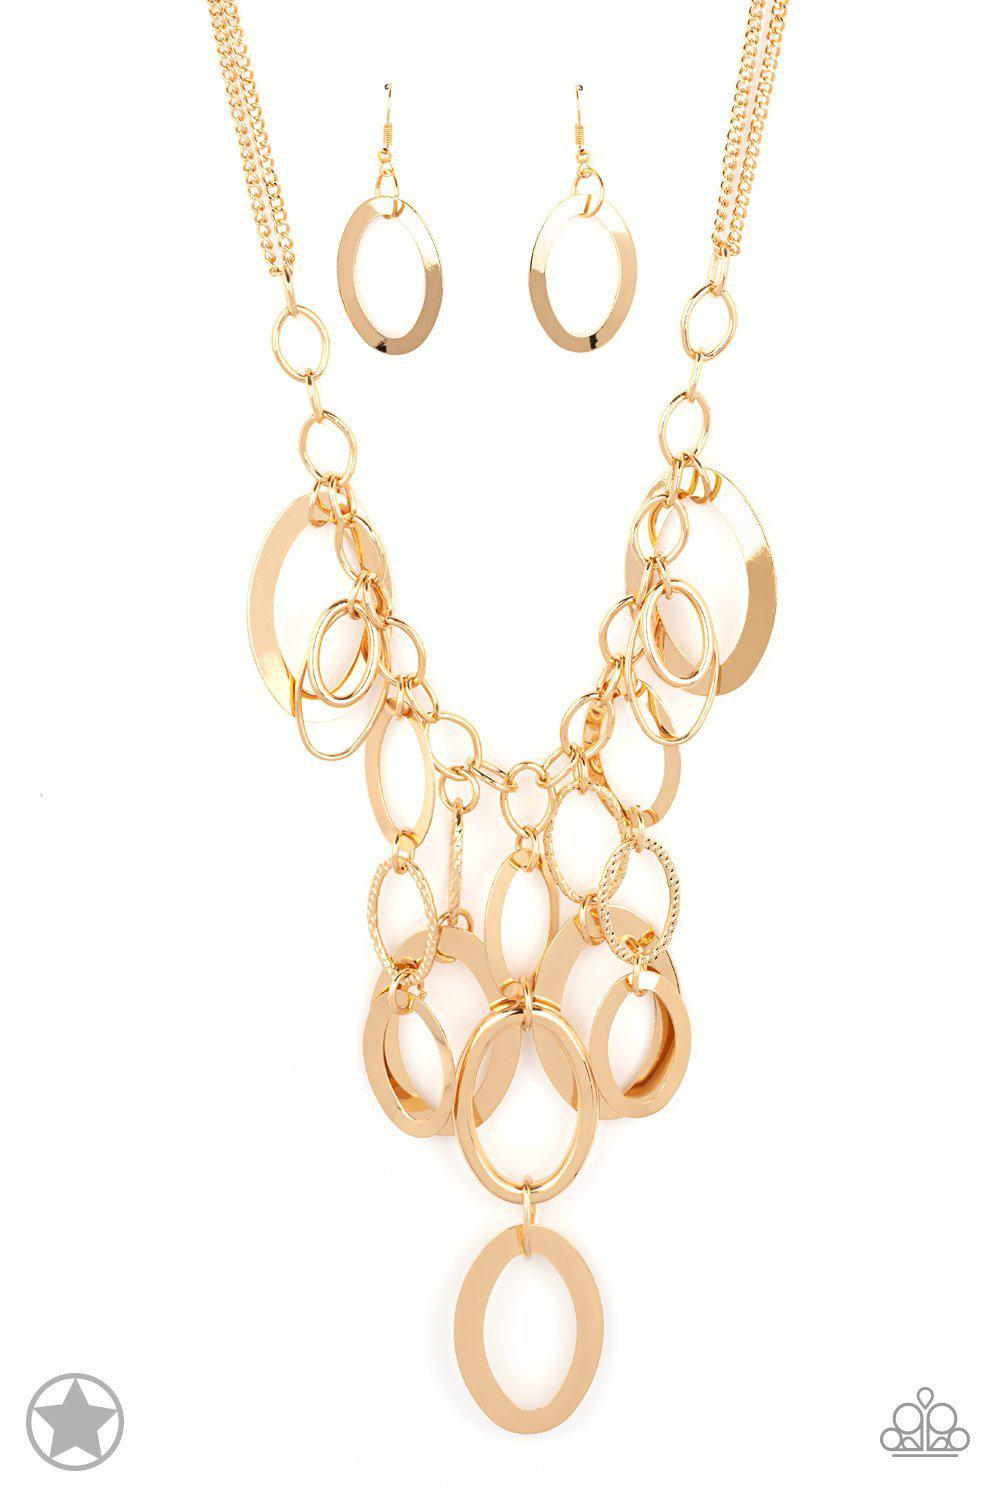 A Golden Spell Gold Necklace and matching Earrings - Paparazzi Accessories - lightbox -CarasShop.com - $5 Jewelry by Cara Jewels